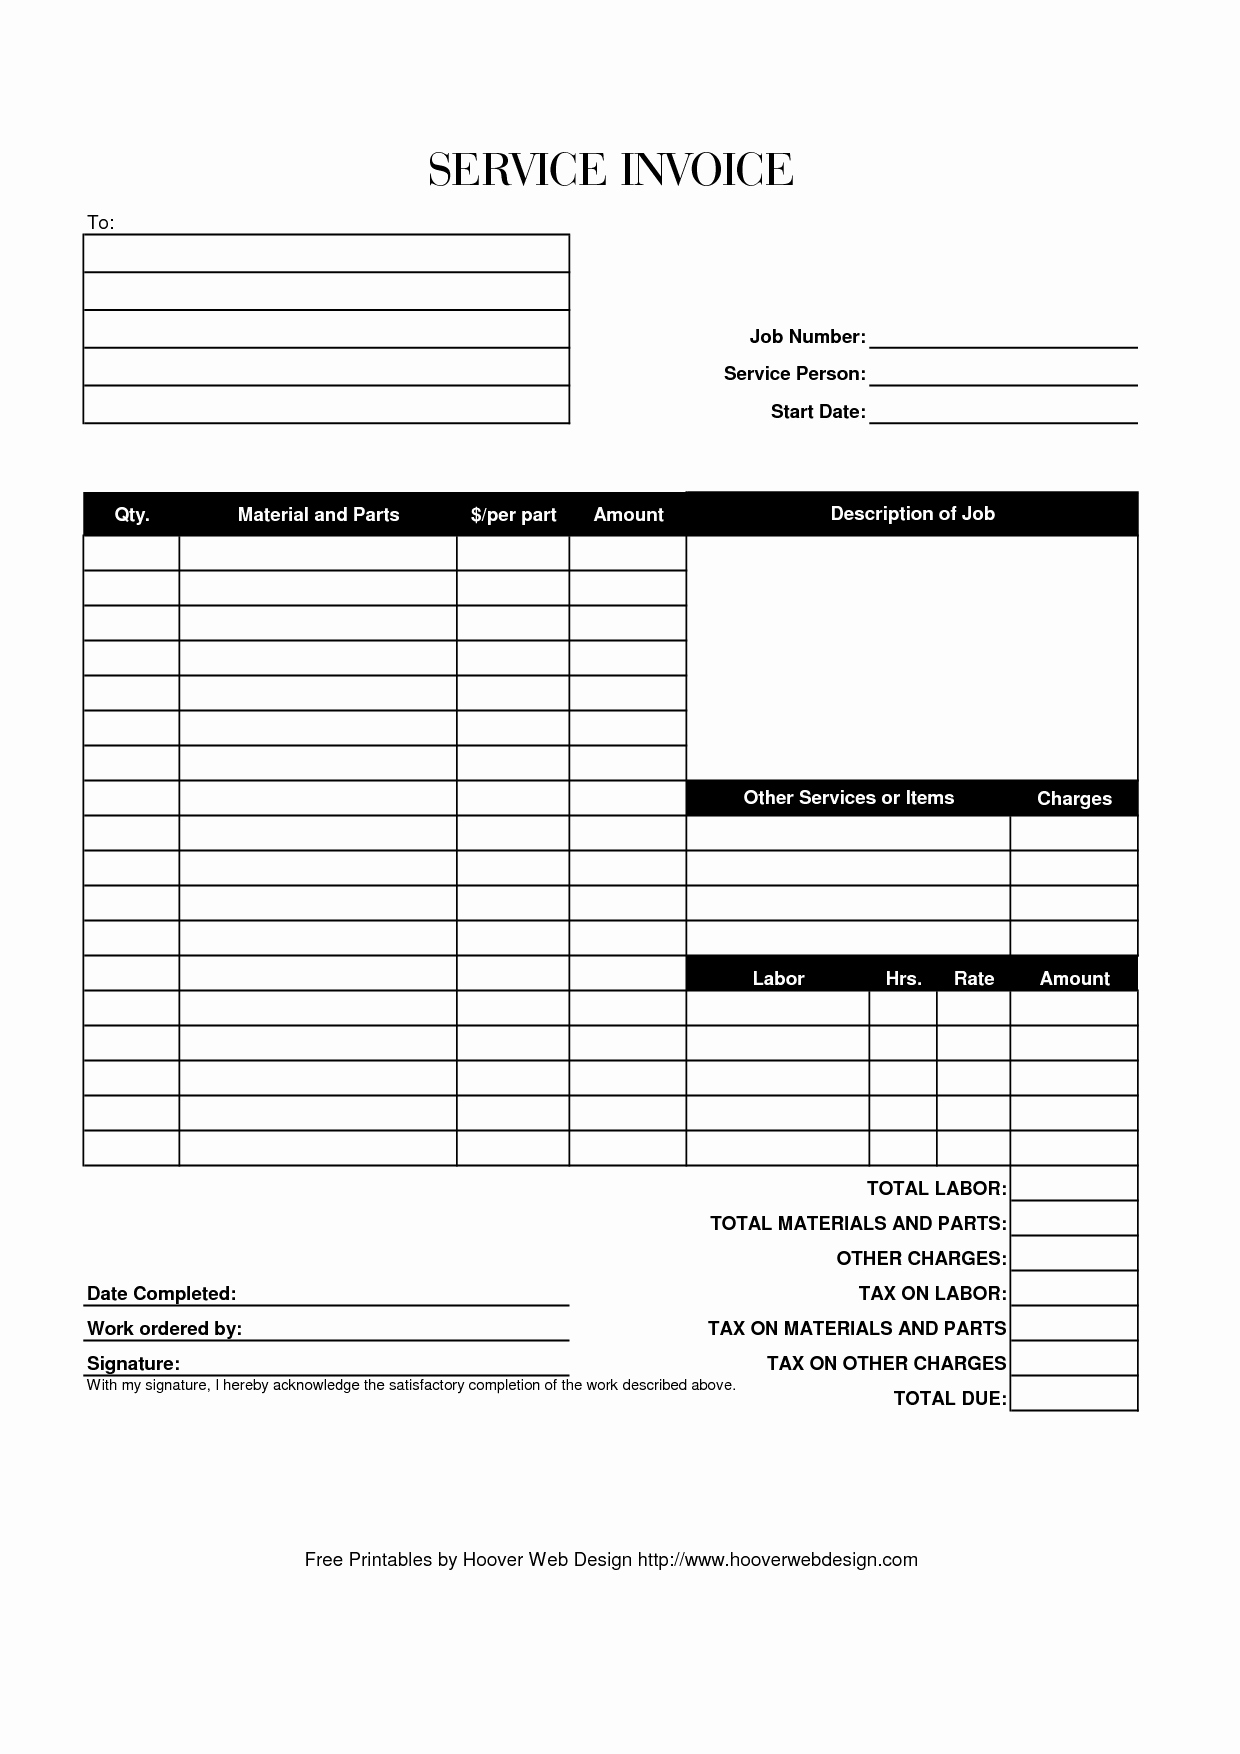 Service Invoice Template Free Best Of Hoover Receipts